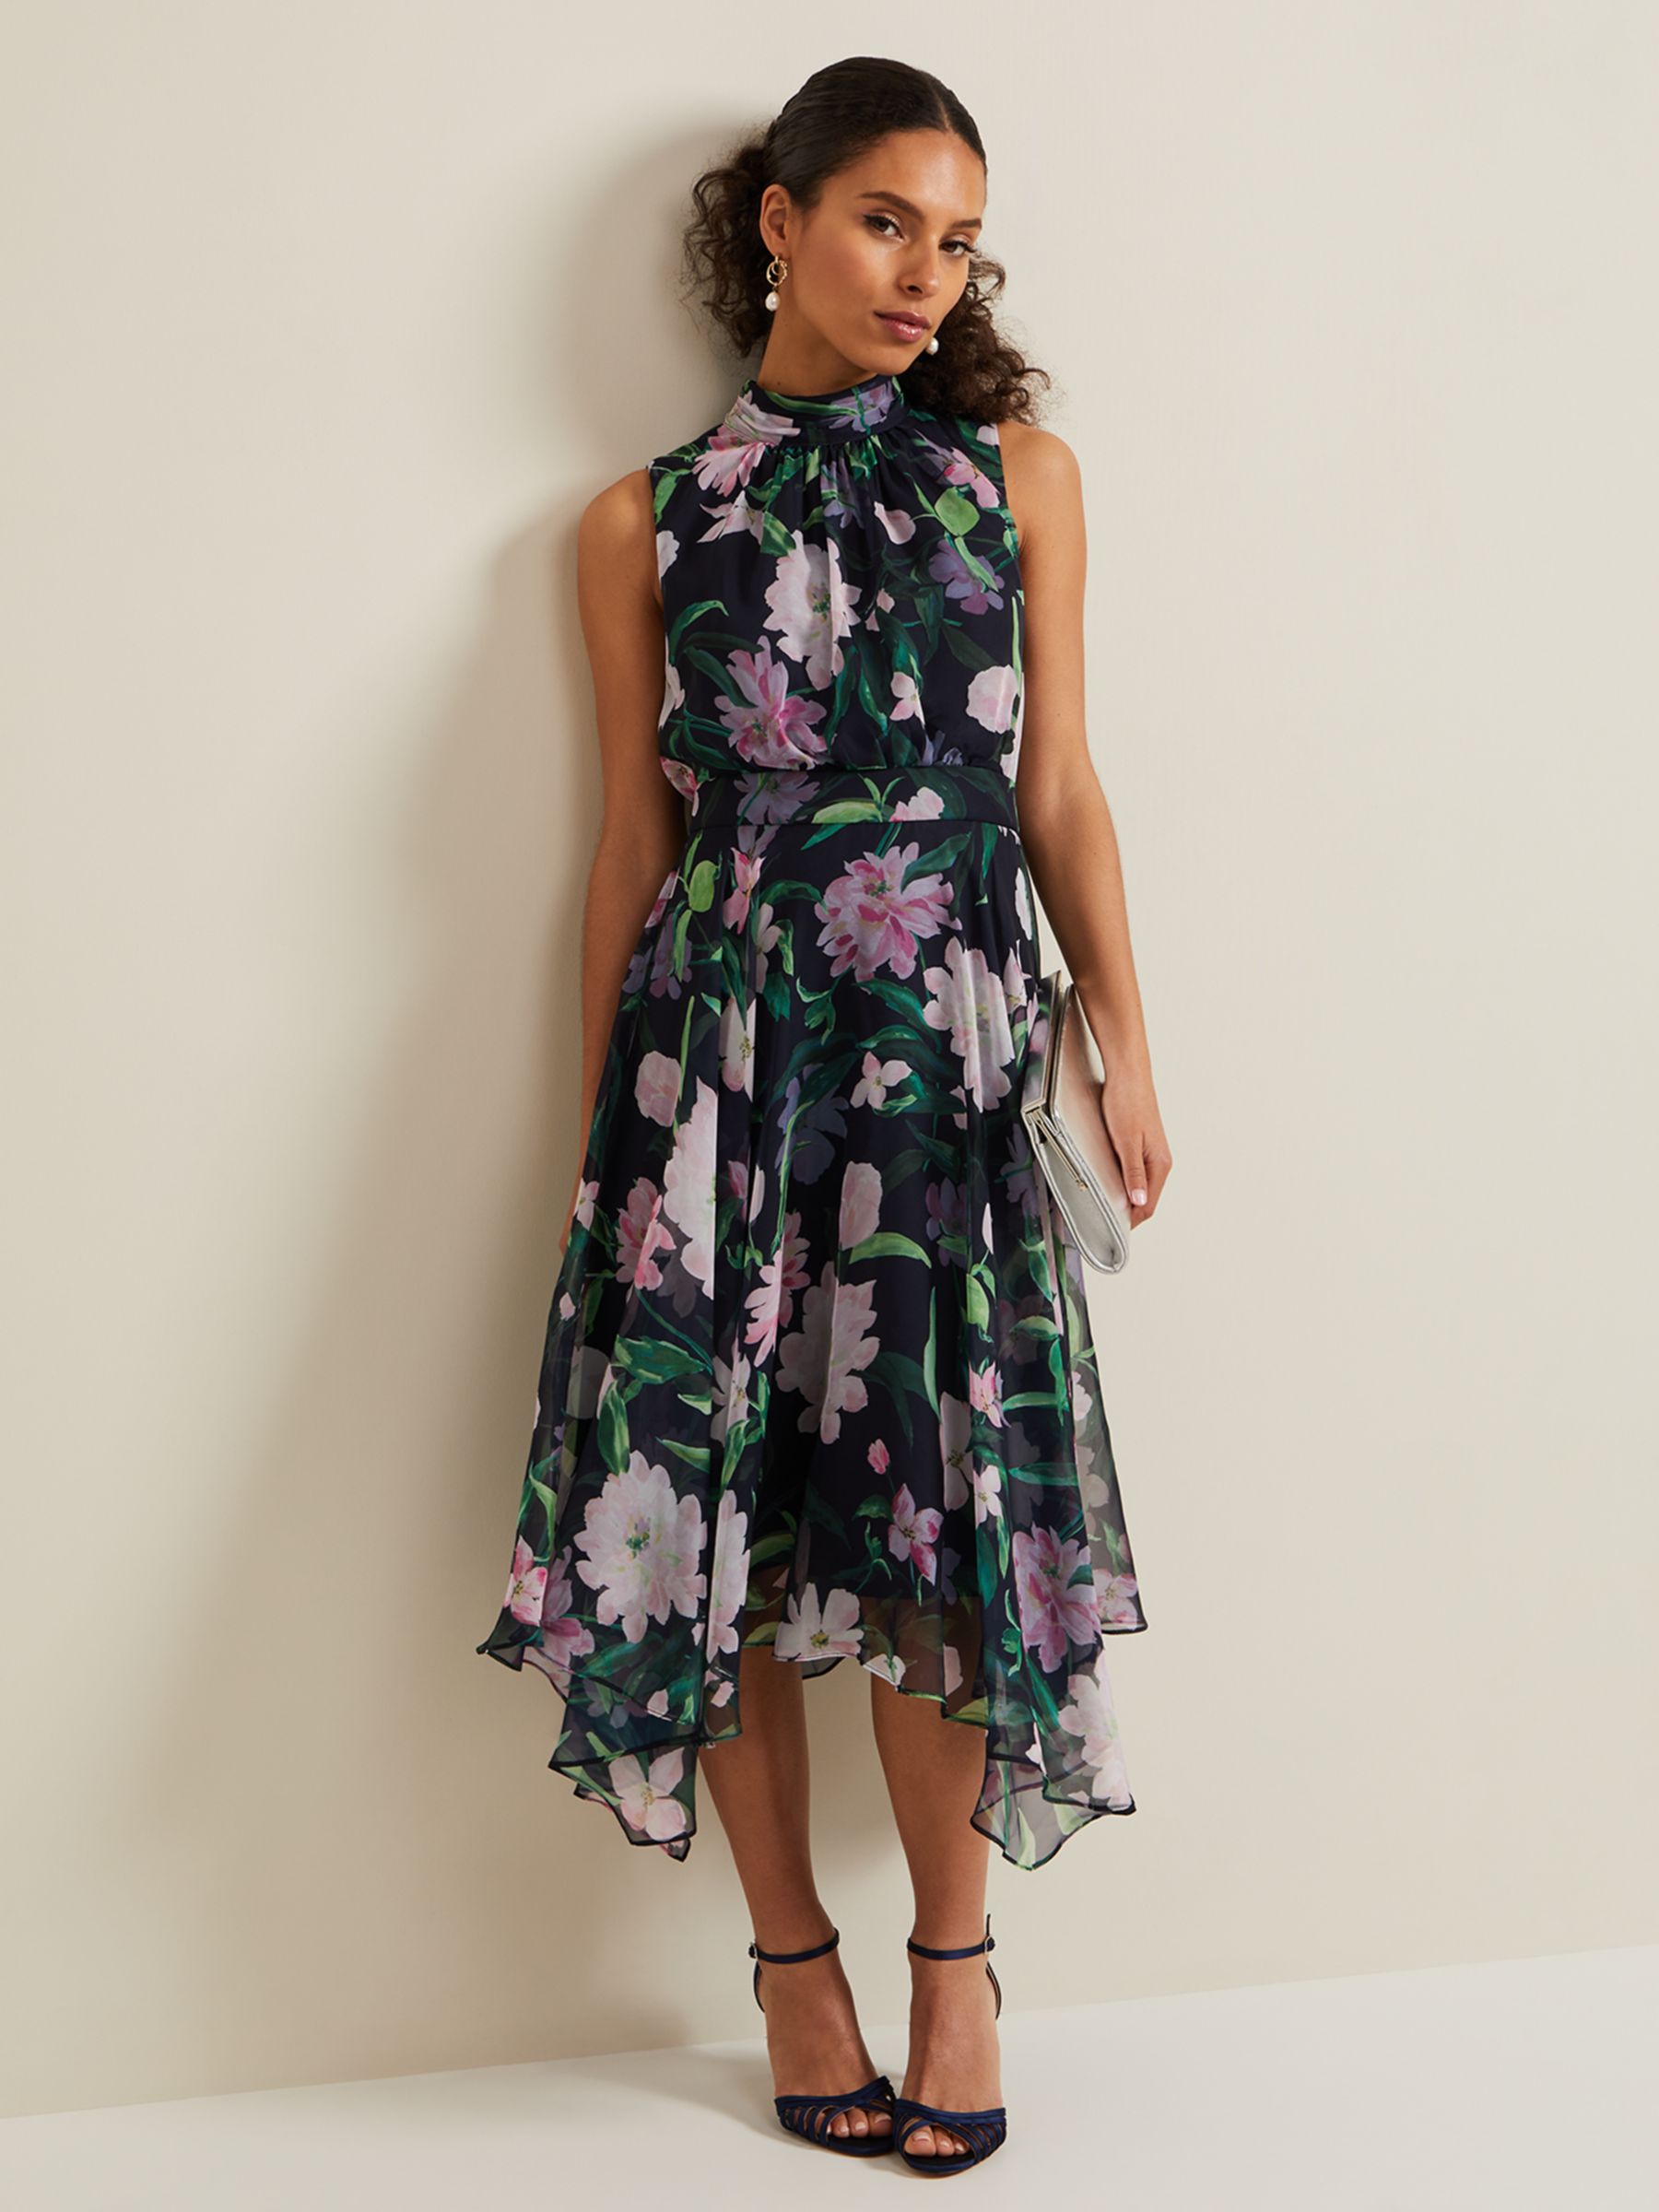 Phase Eight Petite Georgie Tiered Floral Maxi Dress, Navy/Multi